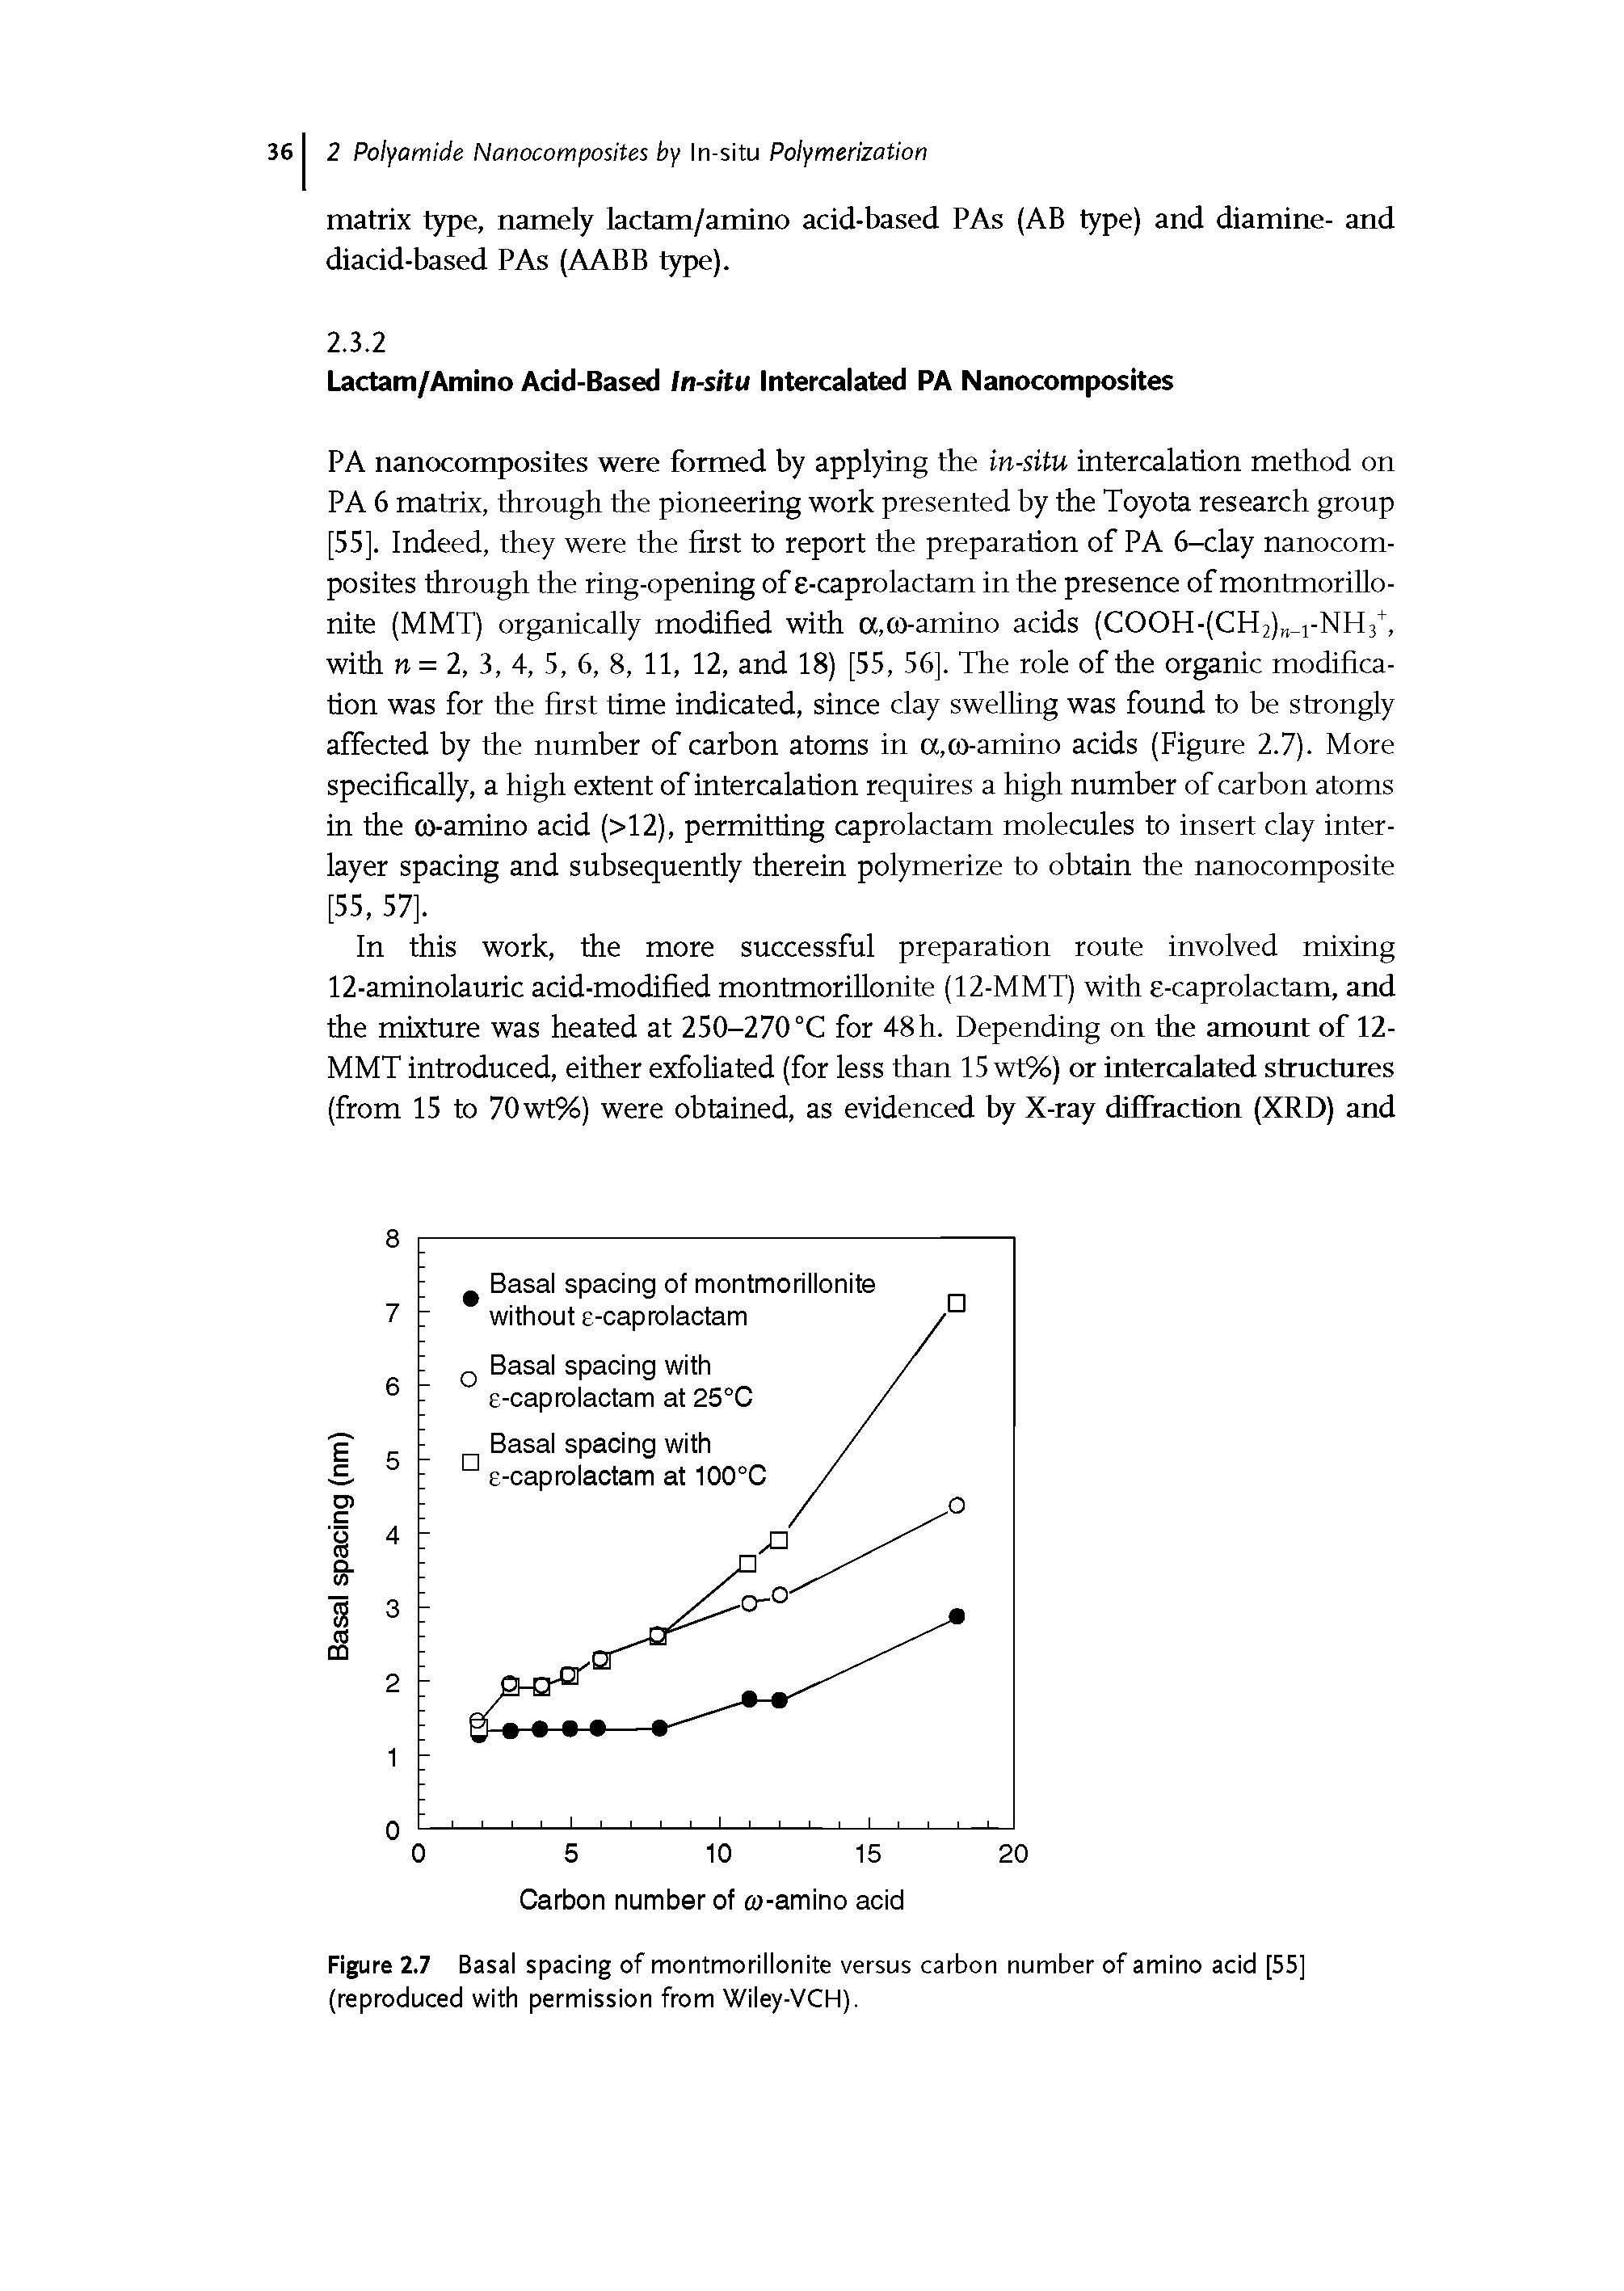 Figure 2.7 Basal spacing of montmoriUonite versus carbon number of amino acid [55] (reproduced with permission from Wiley-VCH).